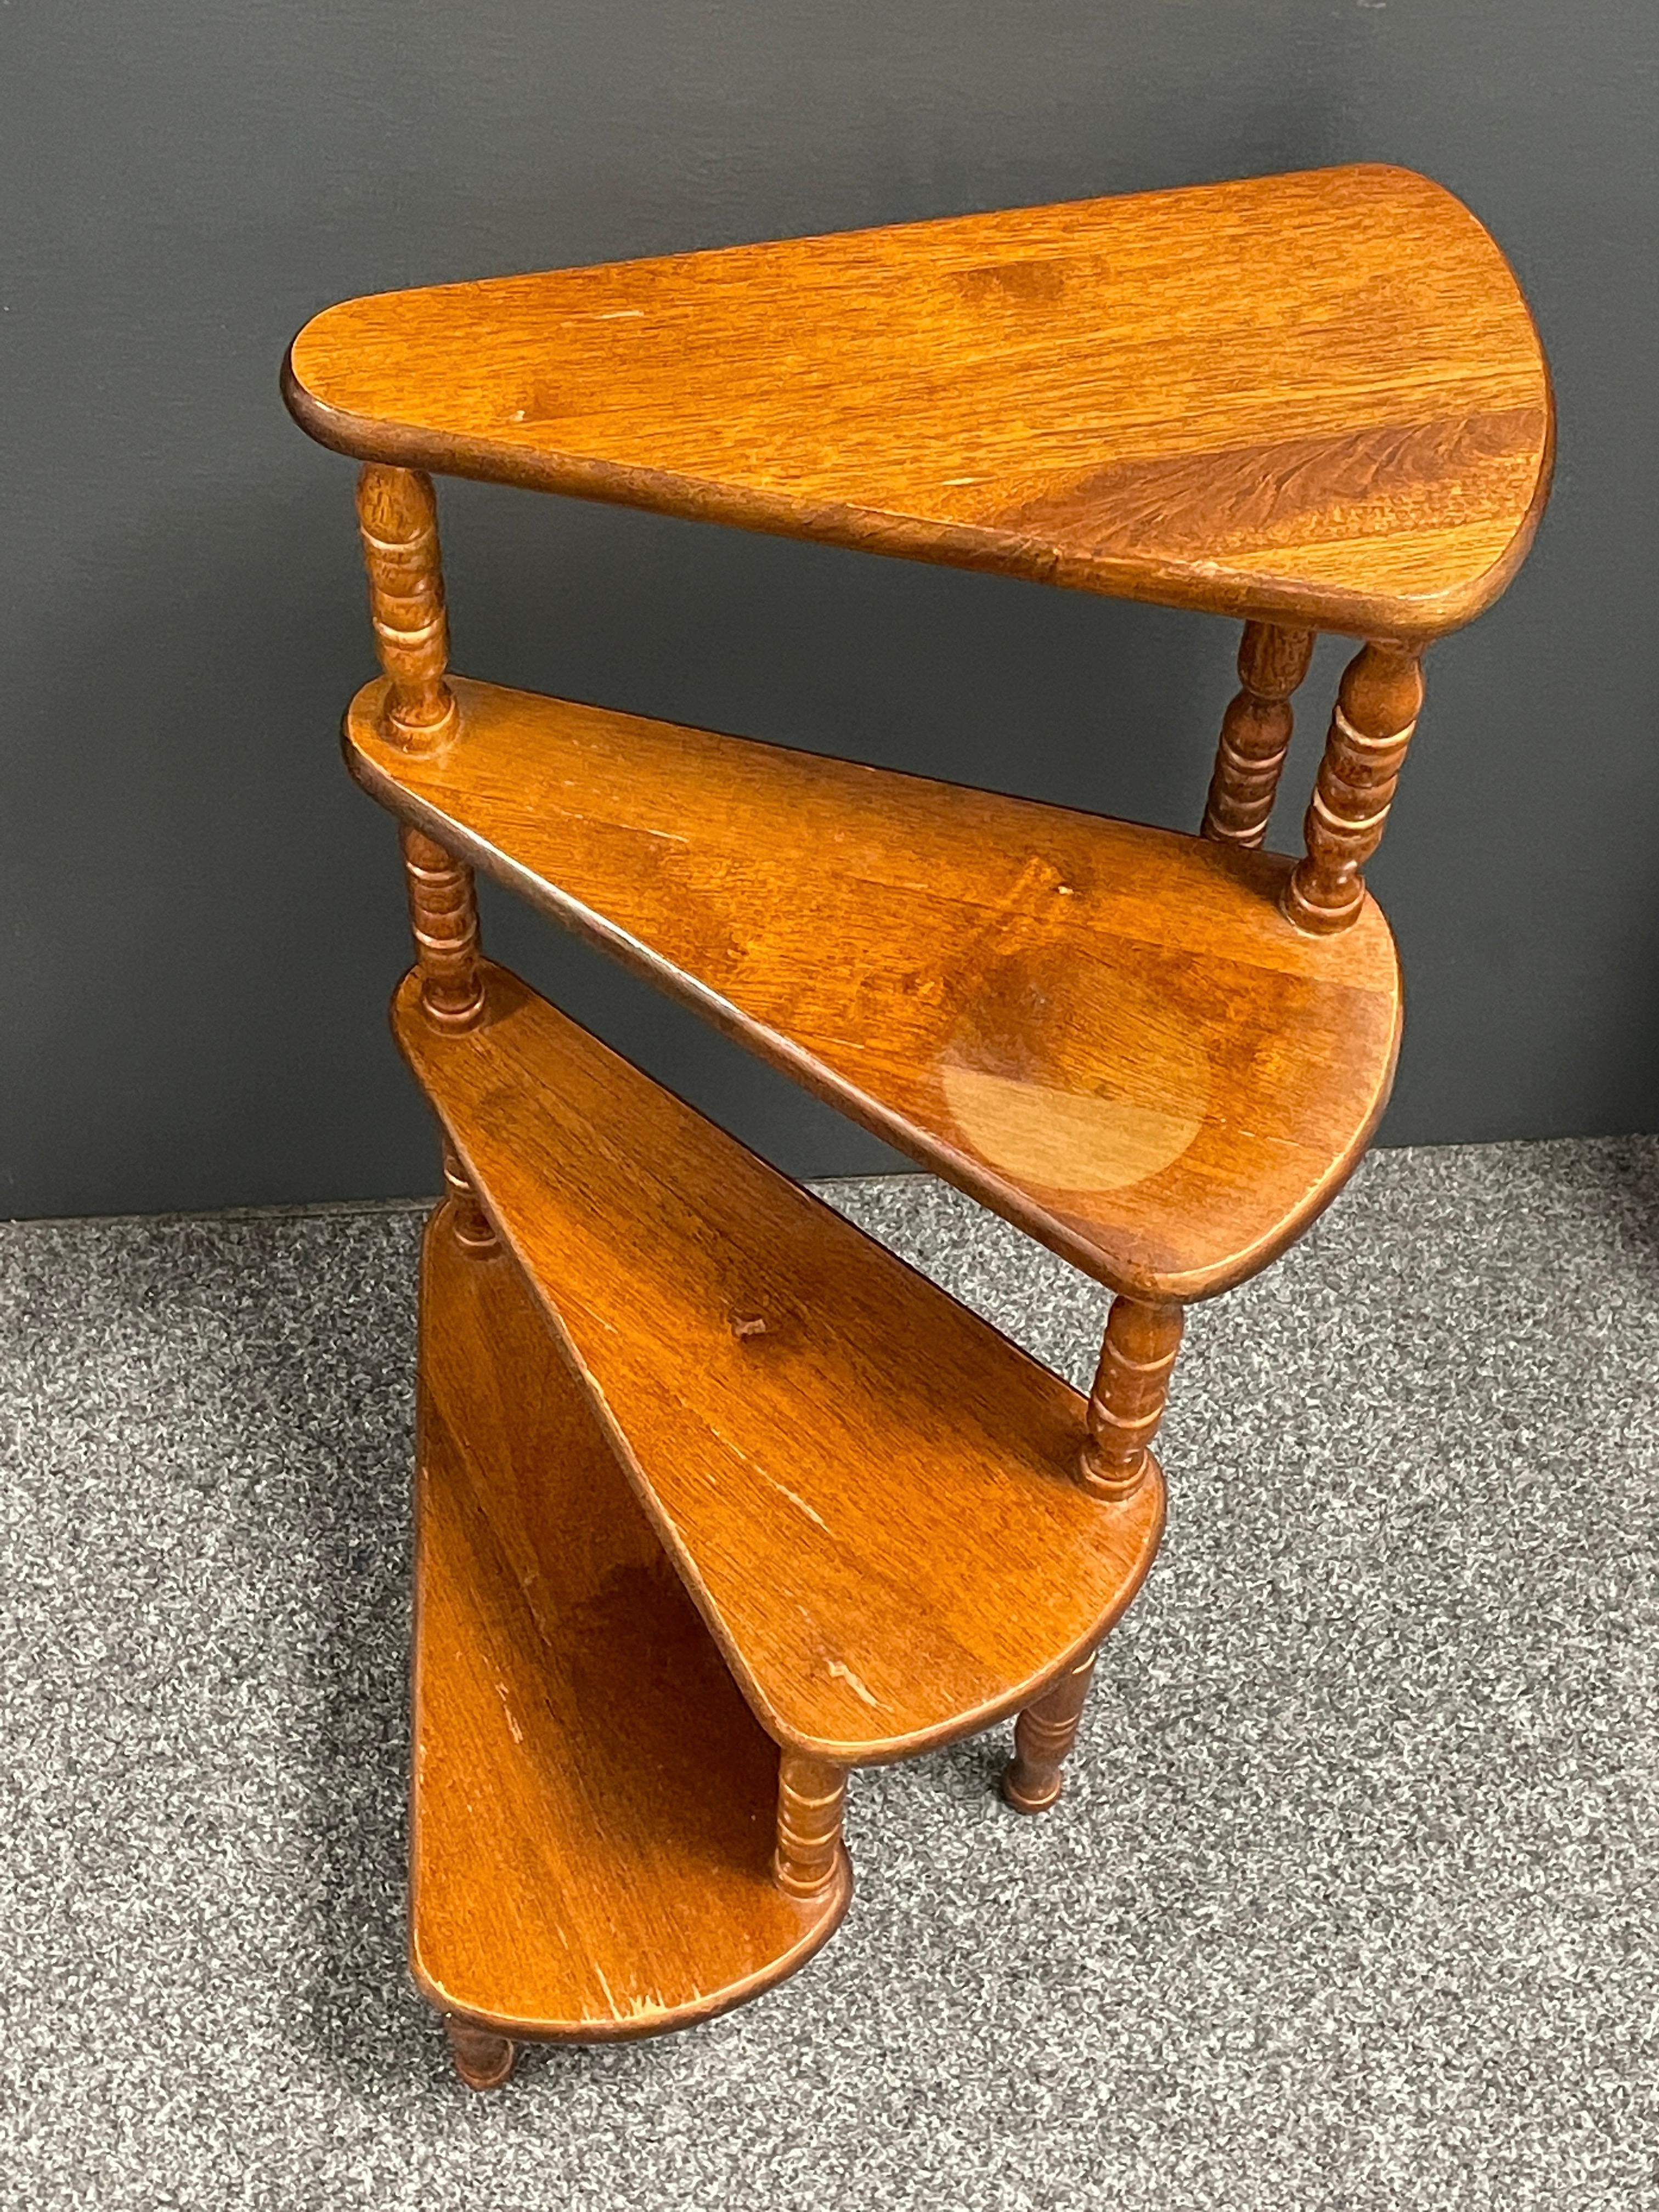 Hand-Carved Mid-20th Century German Carved Wood Spiral Step Library Ladder